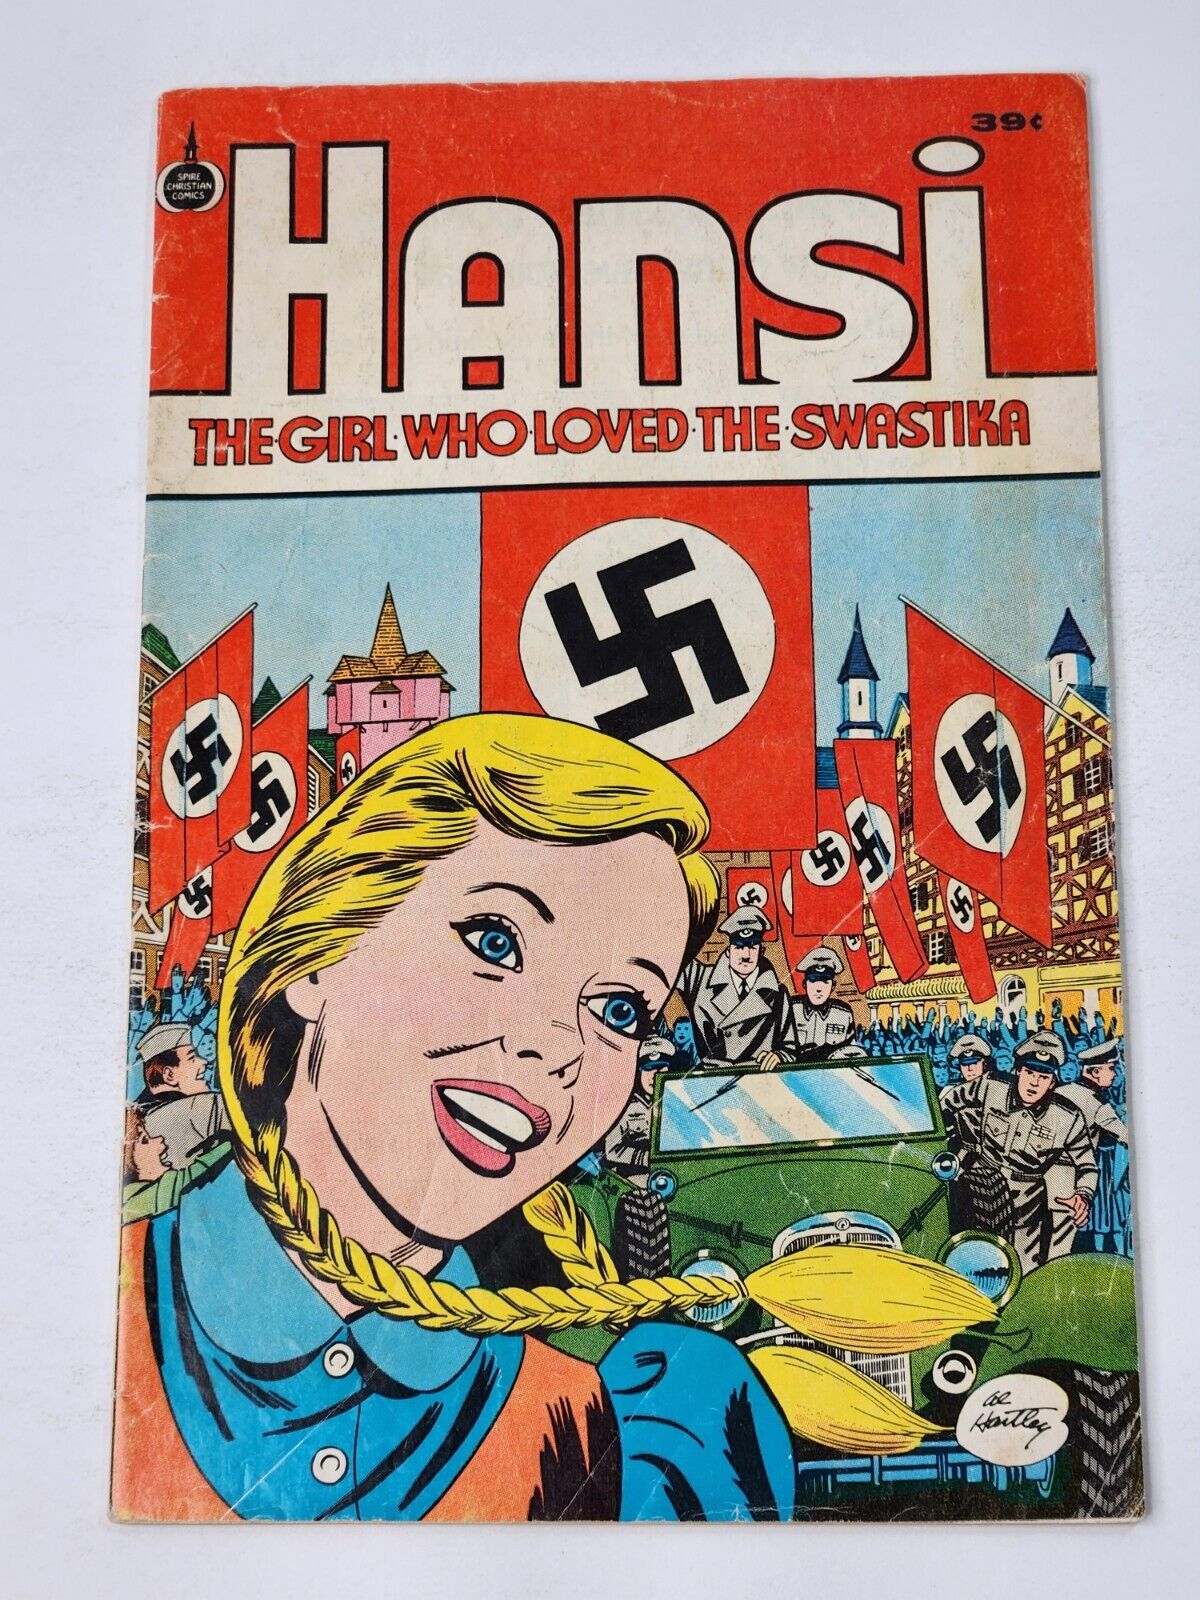 Hansi The Girl Who Loved The Swastika Spire Christain Comics 39 Cent 1976